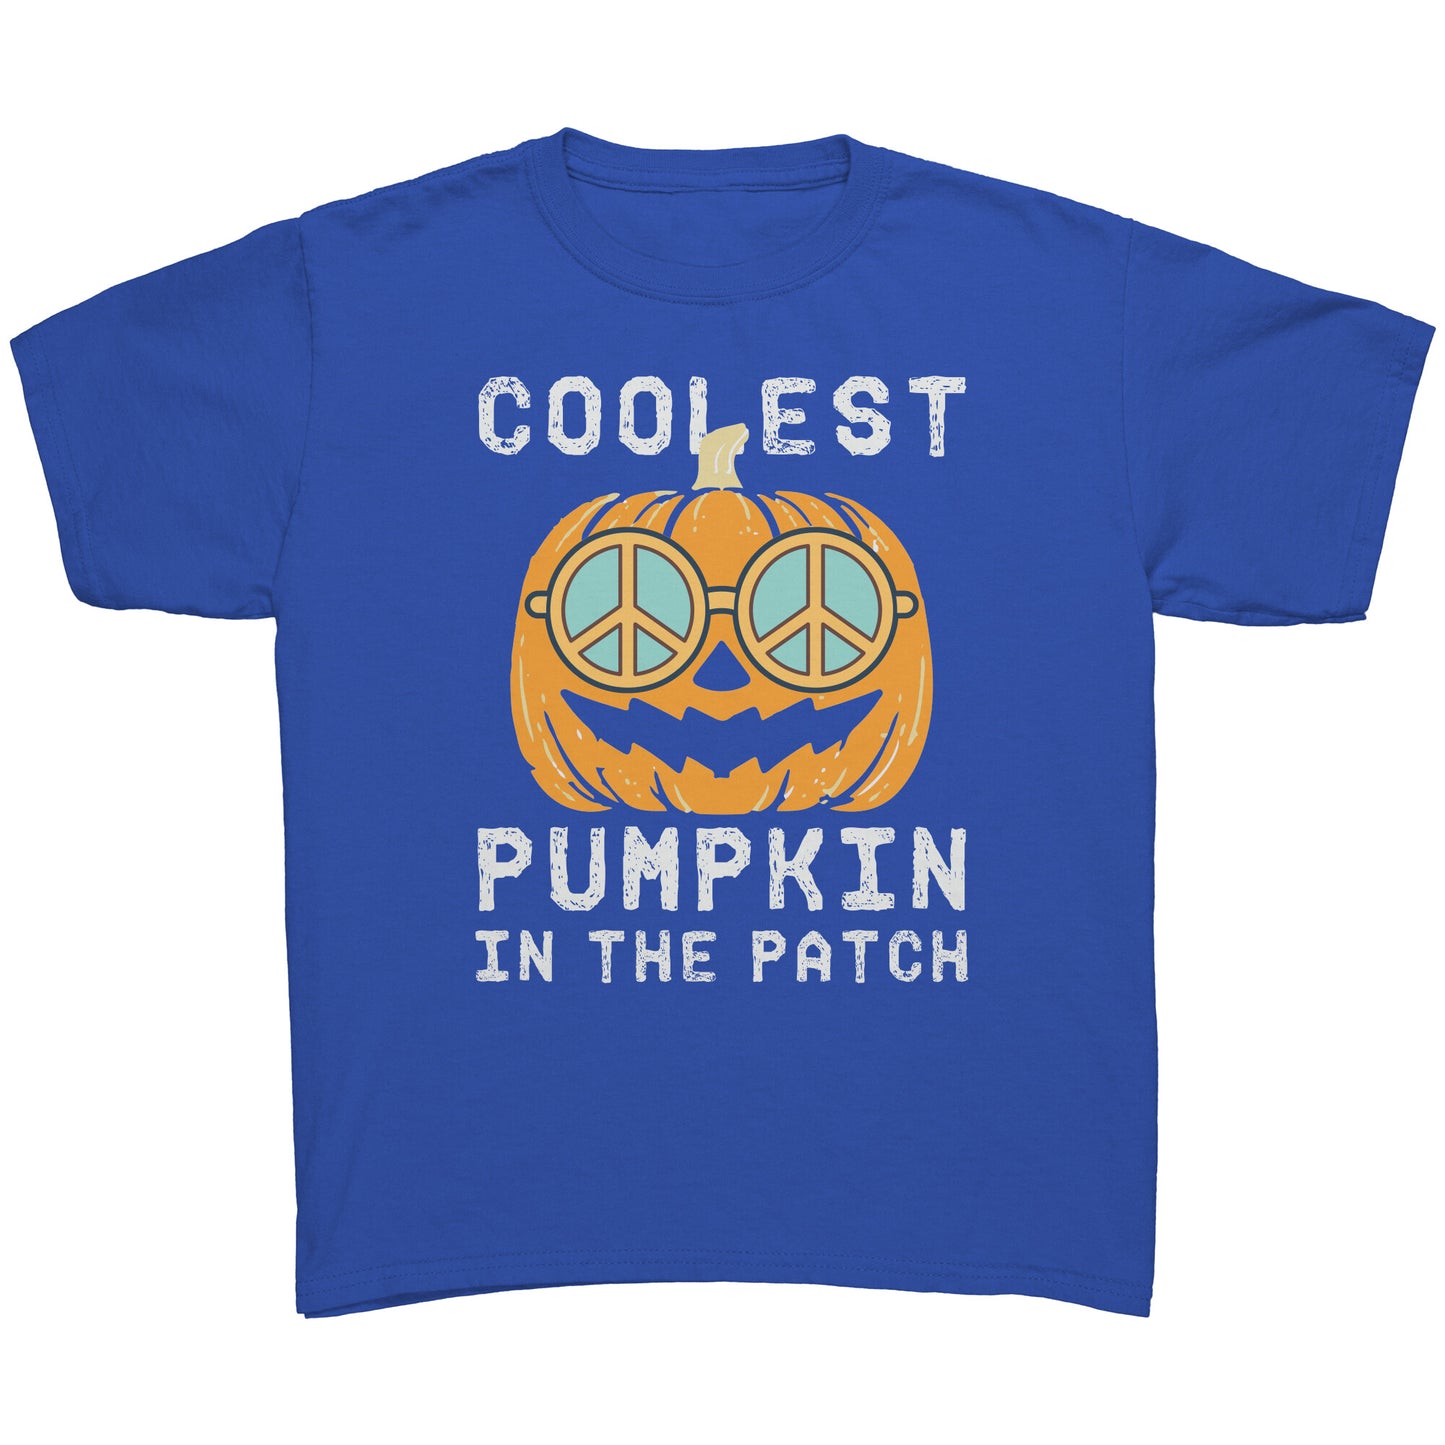 Coolest Punpkin In The Patch Youth Shirt